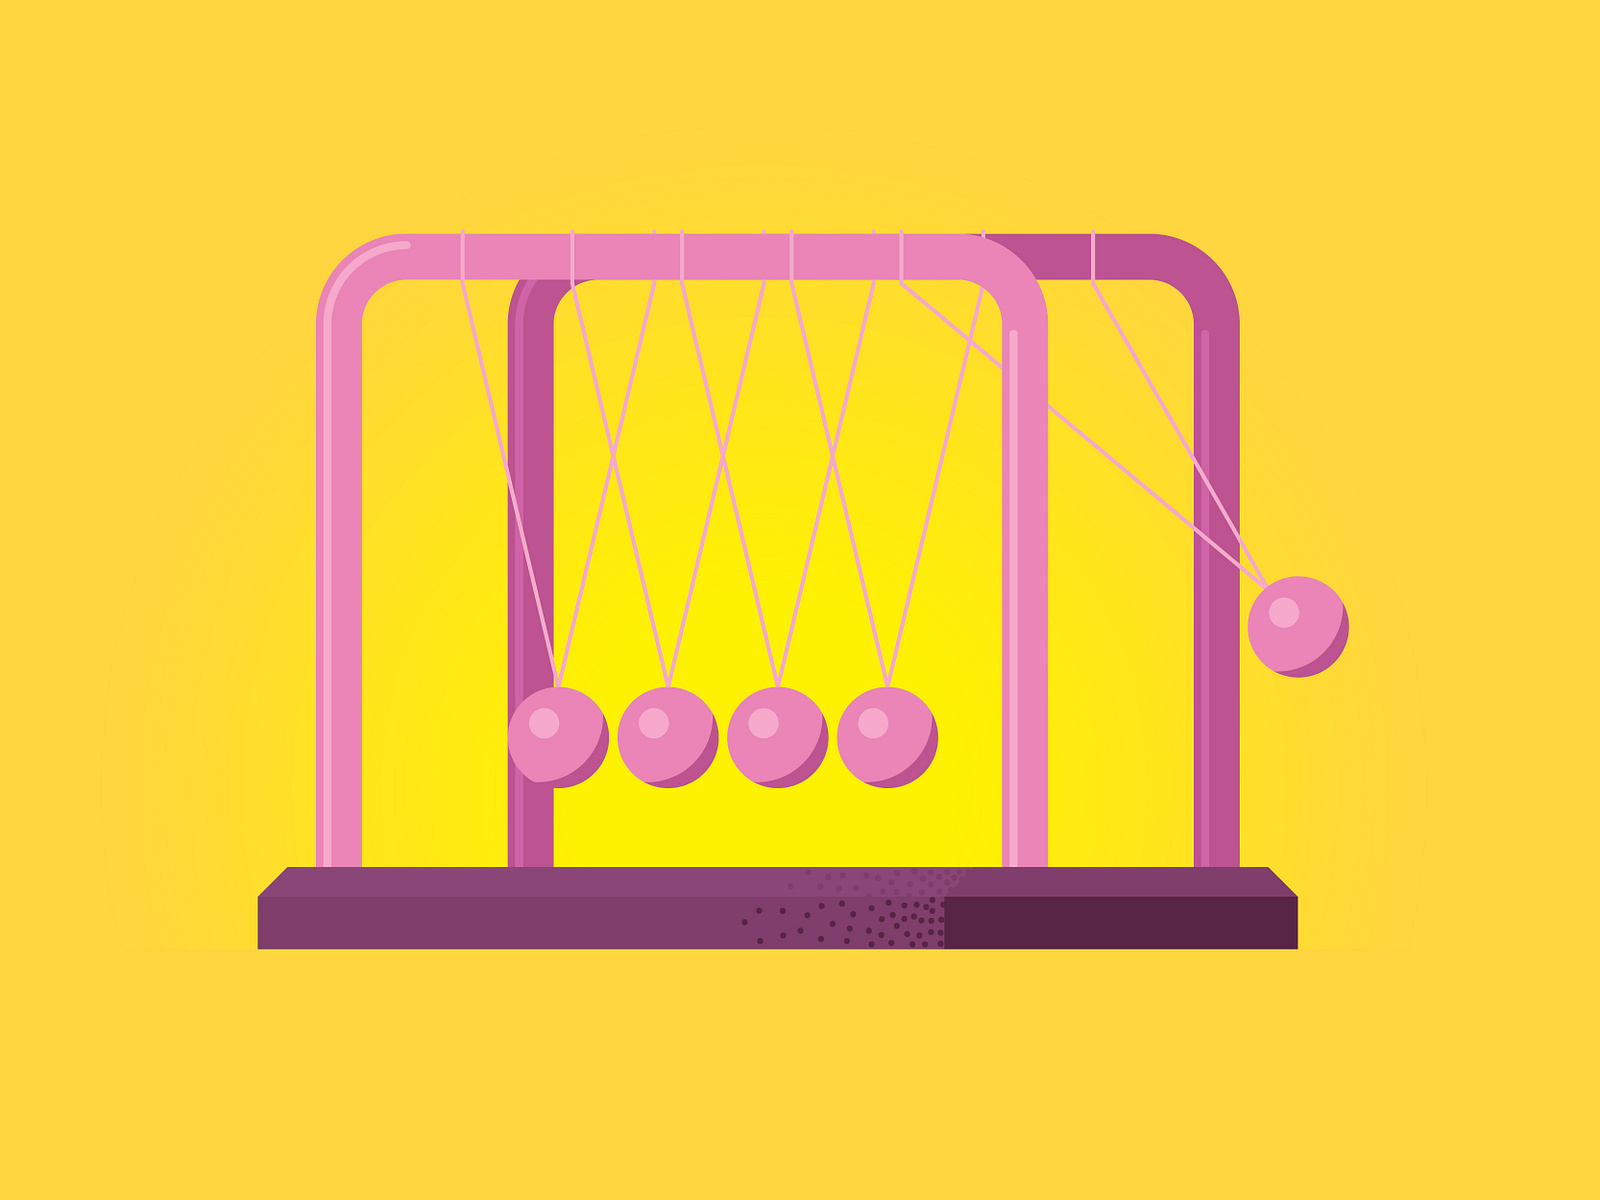 Newton’s Cradle by Chris Rooney on Dribbble